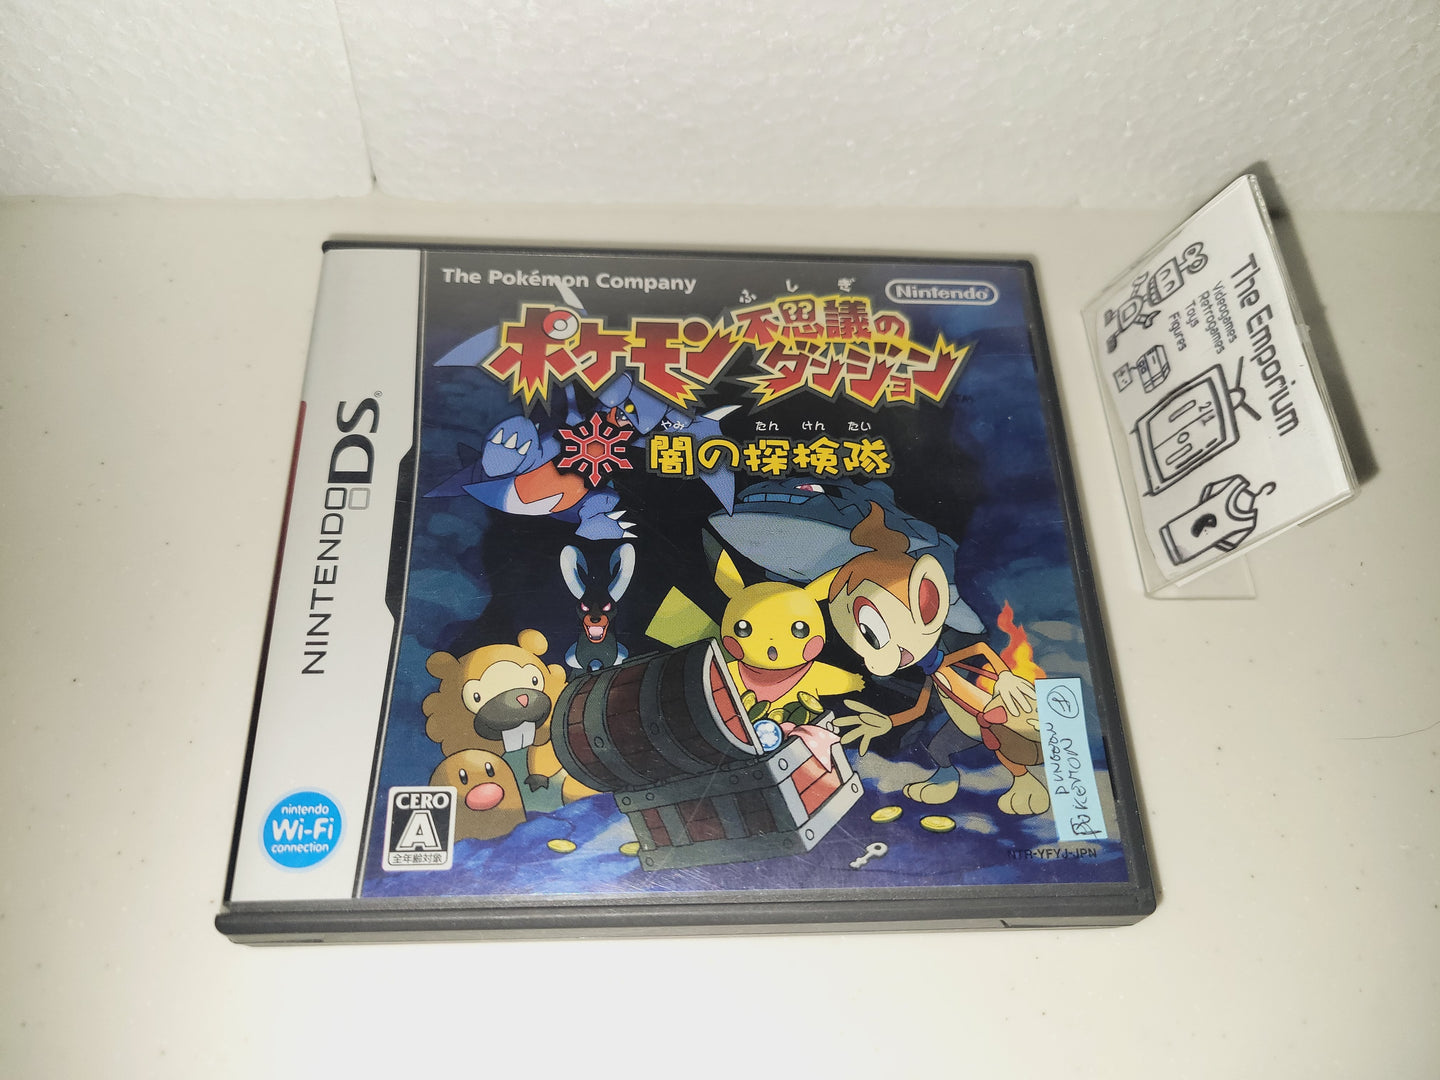 Pokémon Mystery Dungeon: Explorers of Darkness - Nintendo Ds NDS